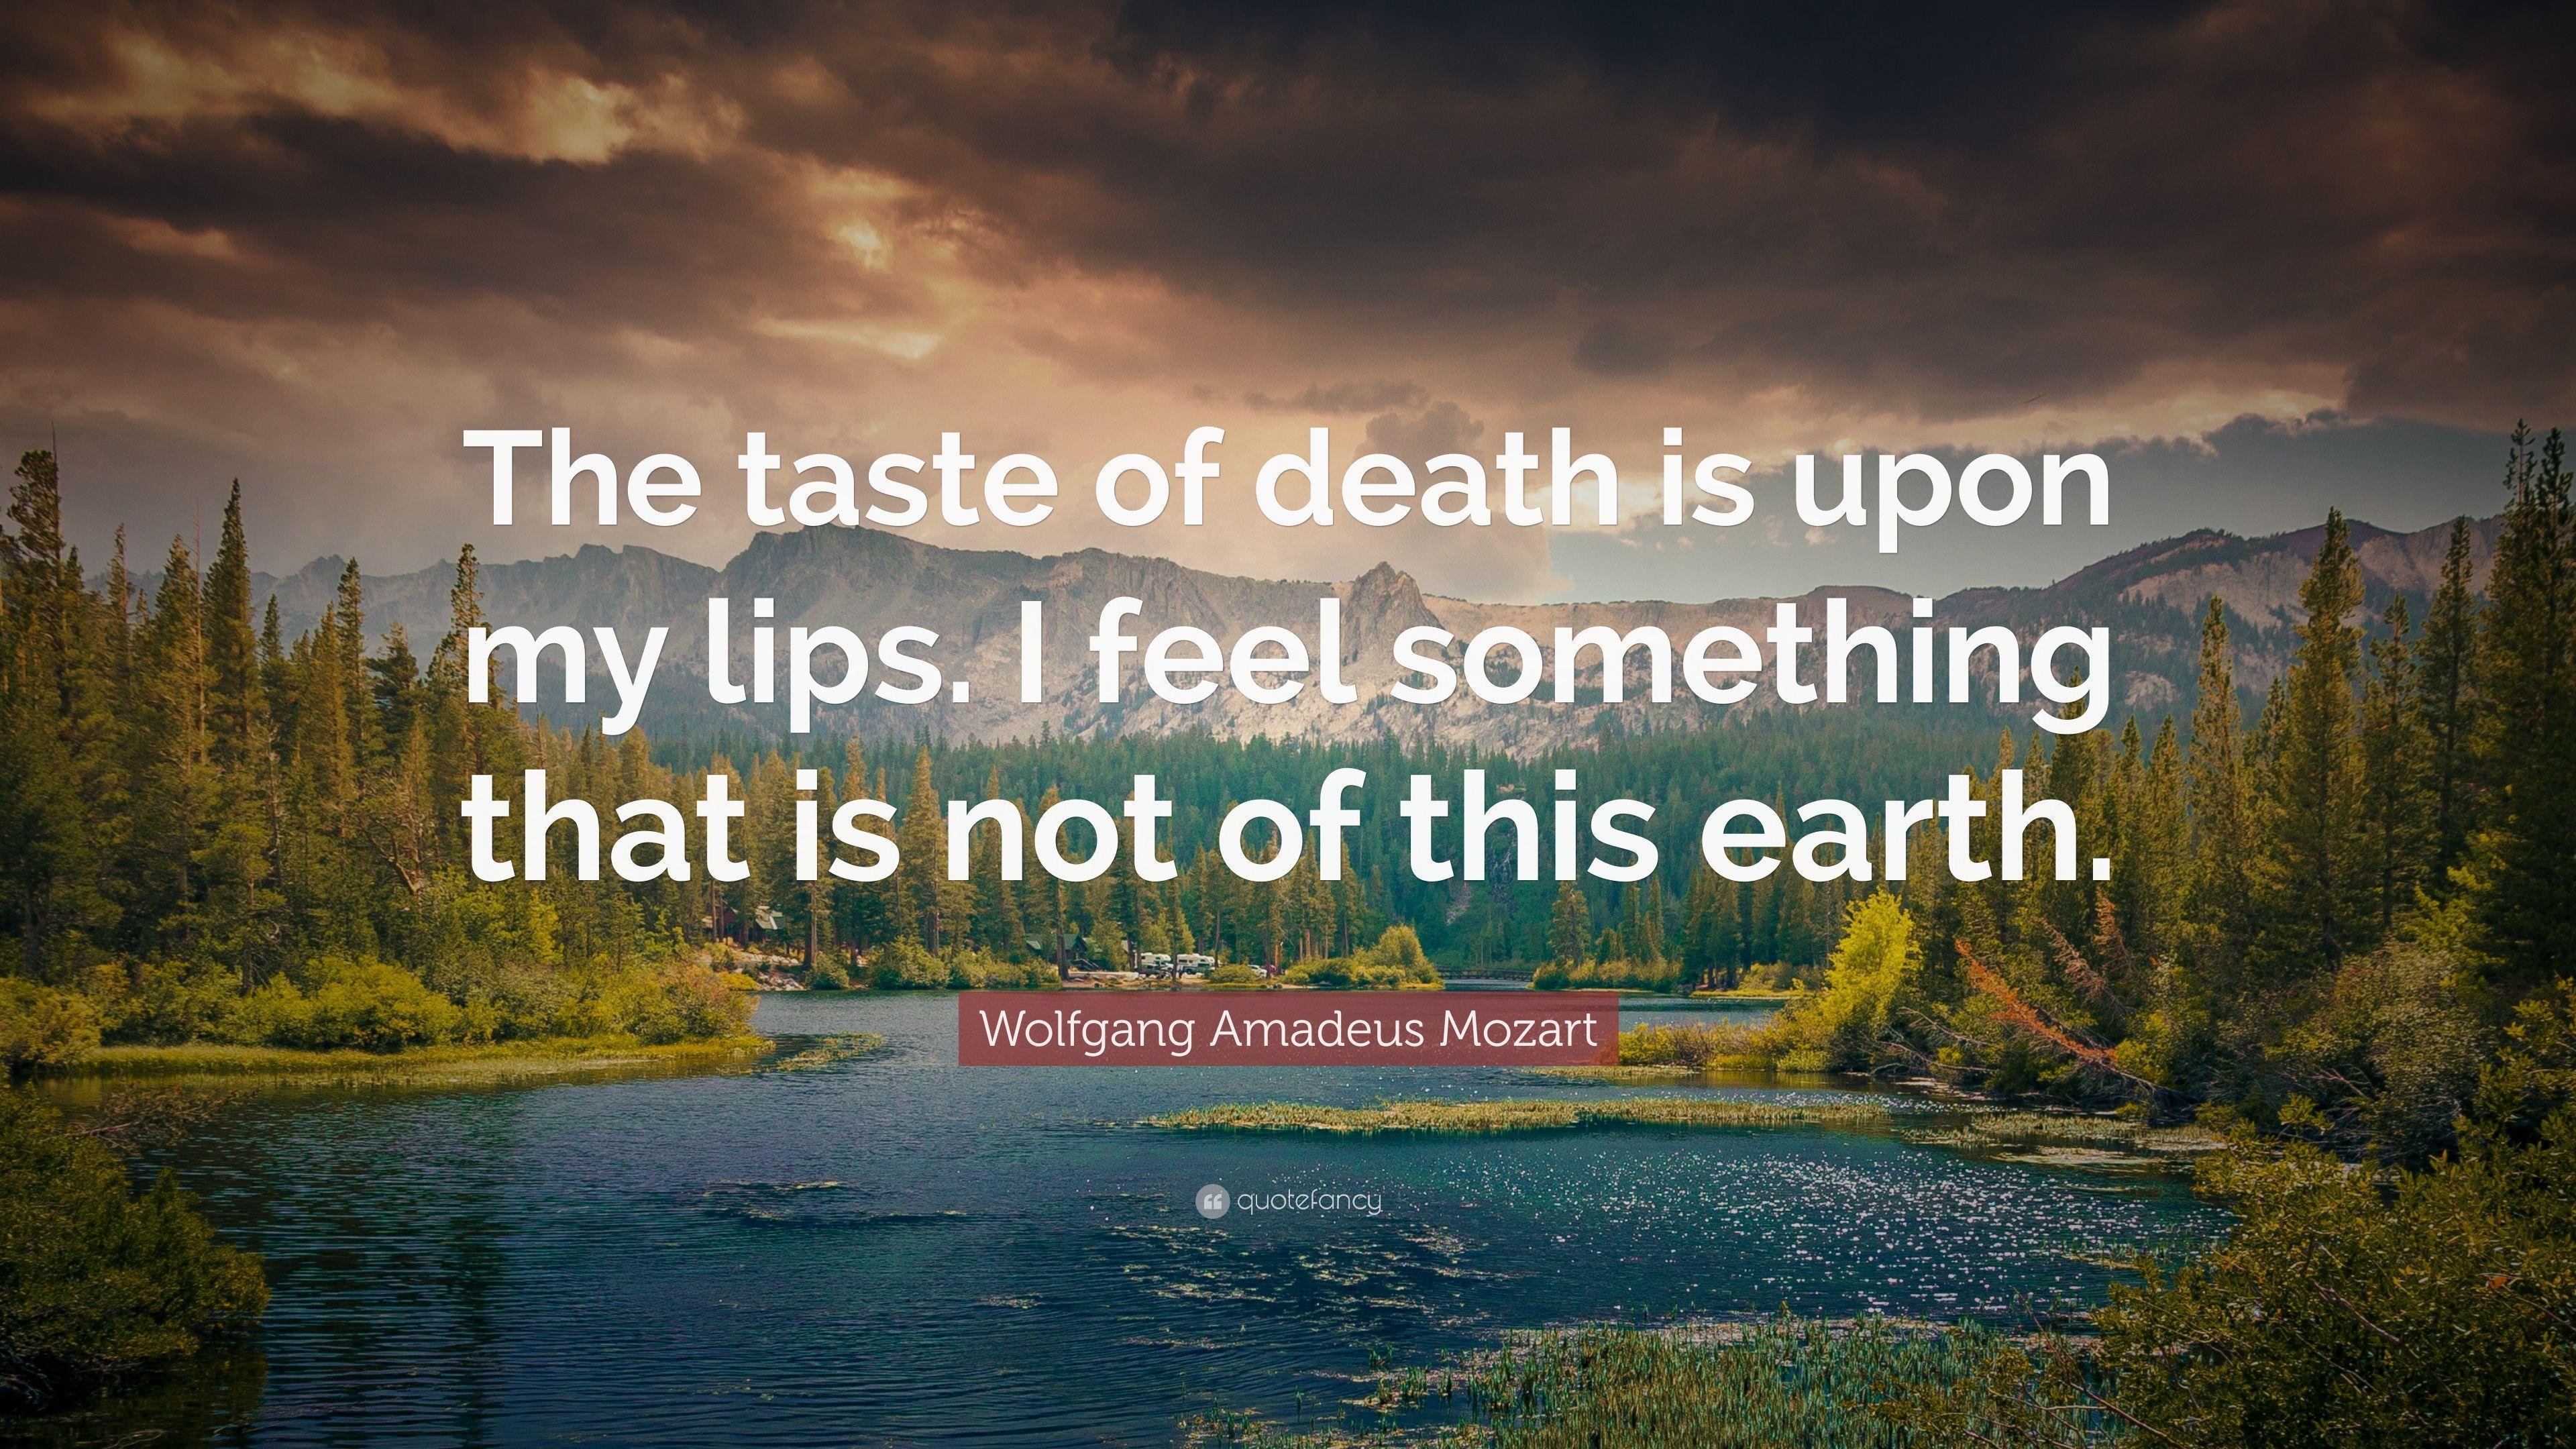 Wolfgang Amadeus Mozart Quote: “The taste of death is upon my lips